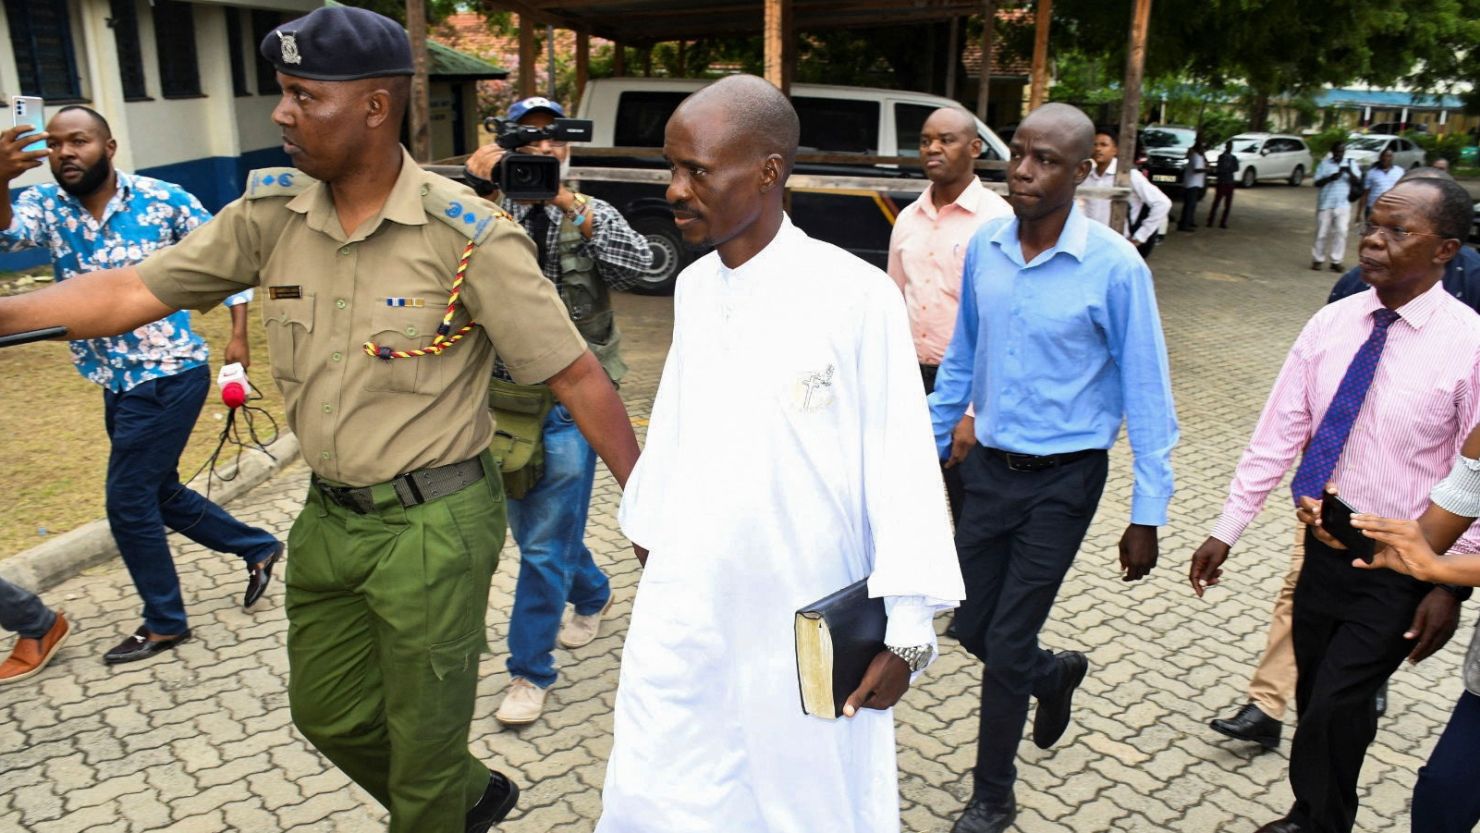 Detectives escort Ezekiel Ombok Odero, the Head of New Life Prayer Center/Church in Kilifi County, at the police headquarters for investigations into the Shakahola killings linked to pastor Paul Mackenzie, in Mombasa, Kenya April 27, 2023. REUTERS/Stringer